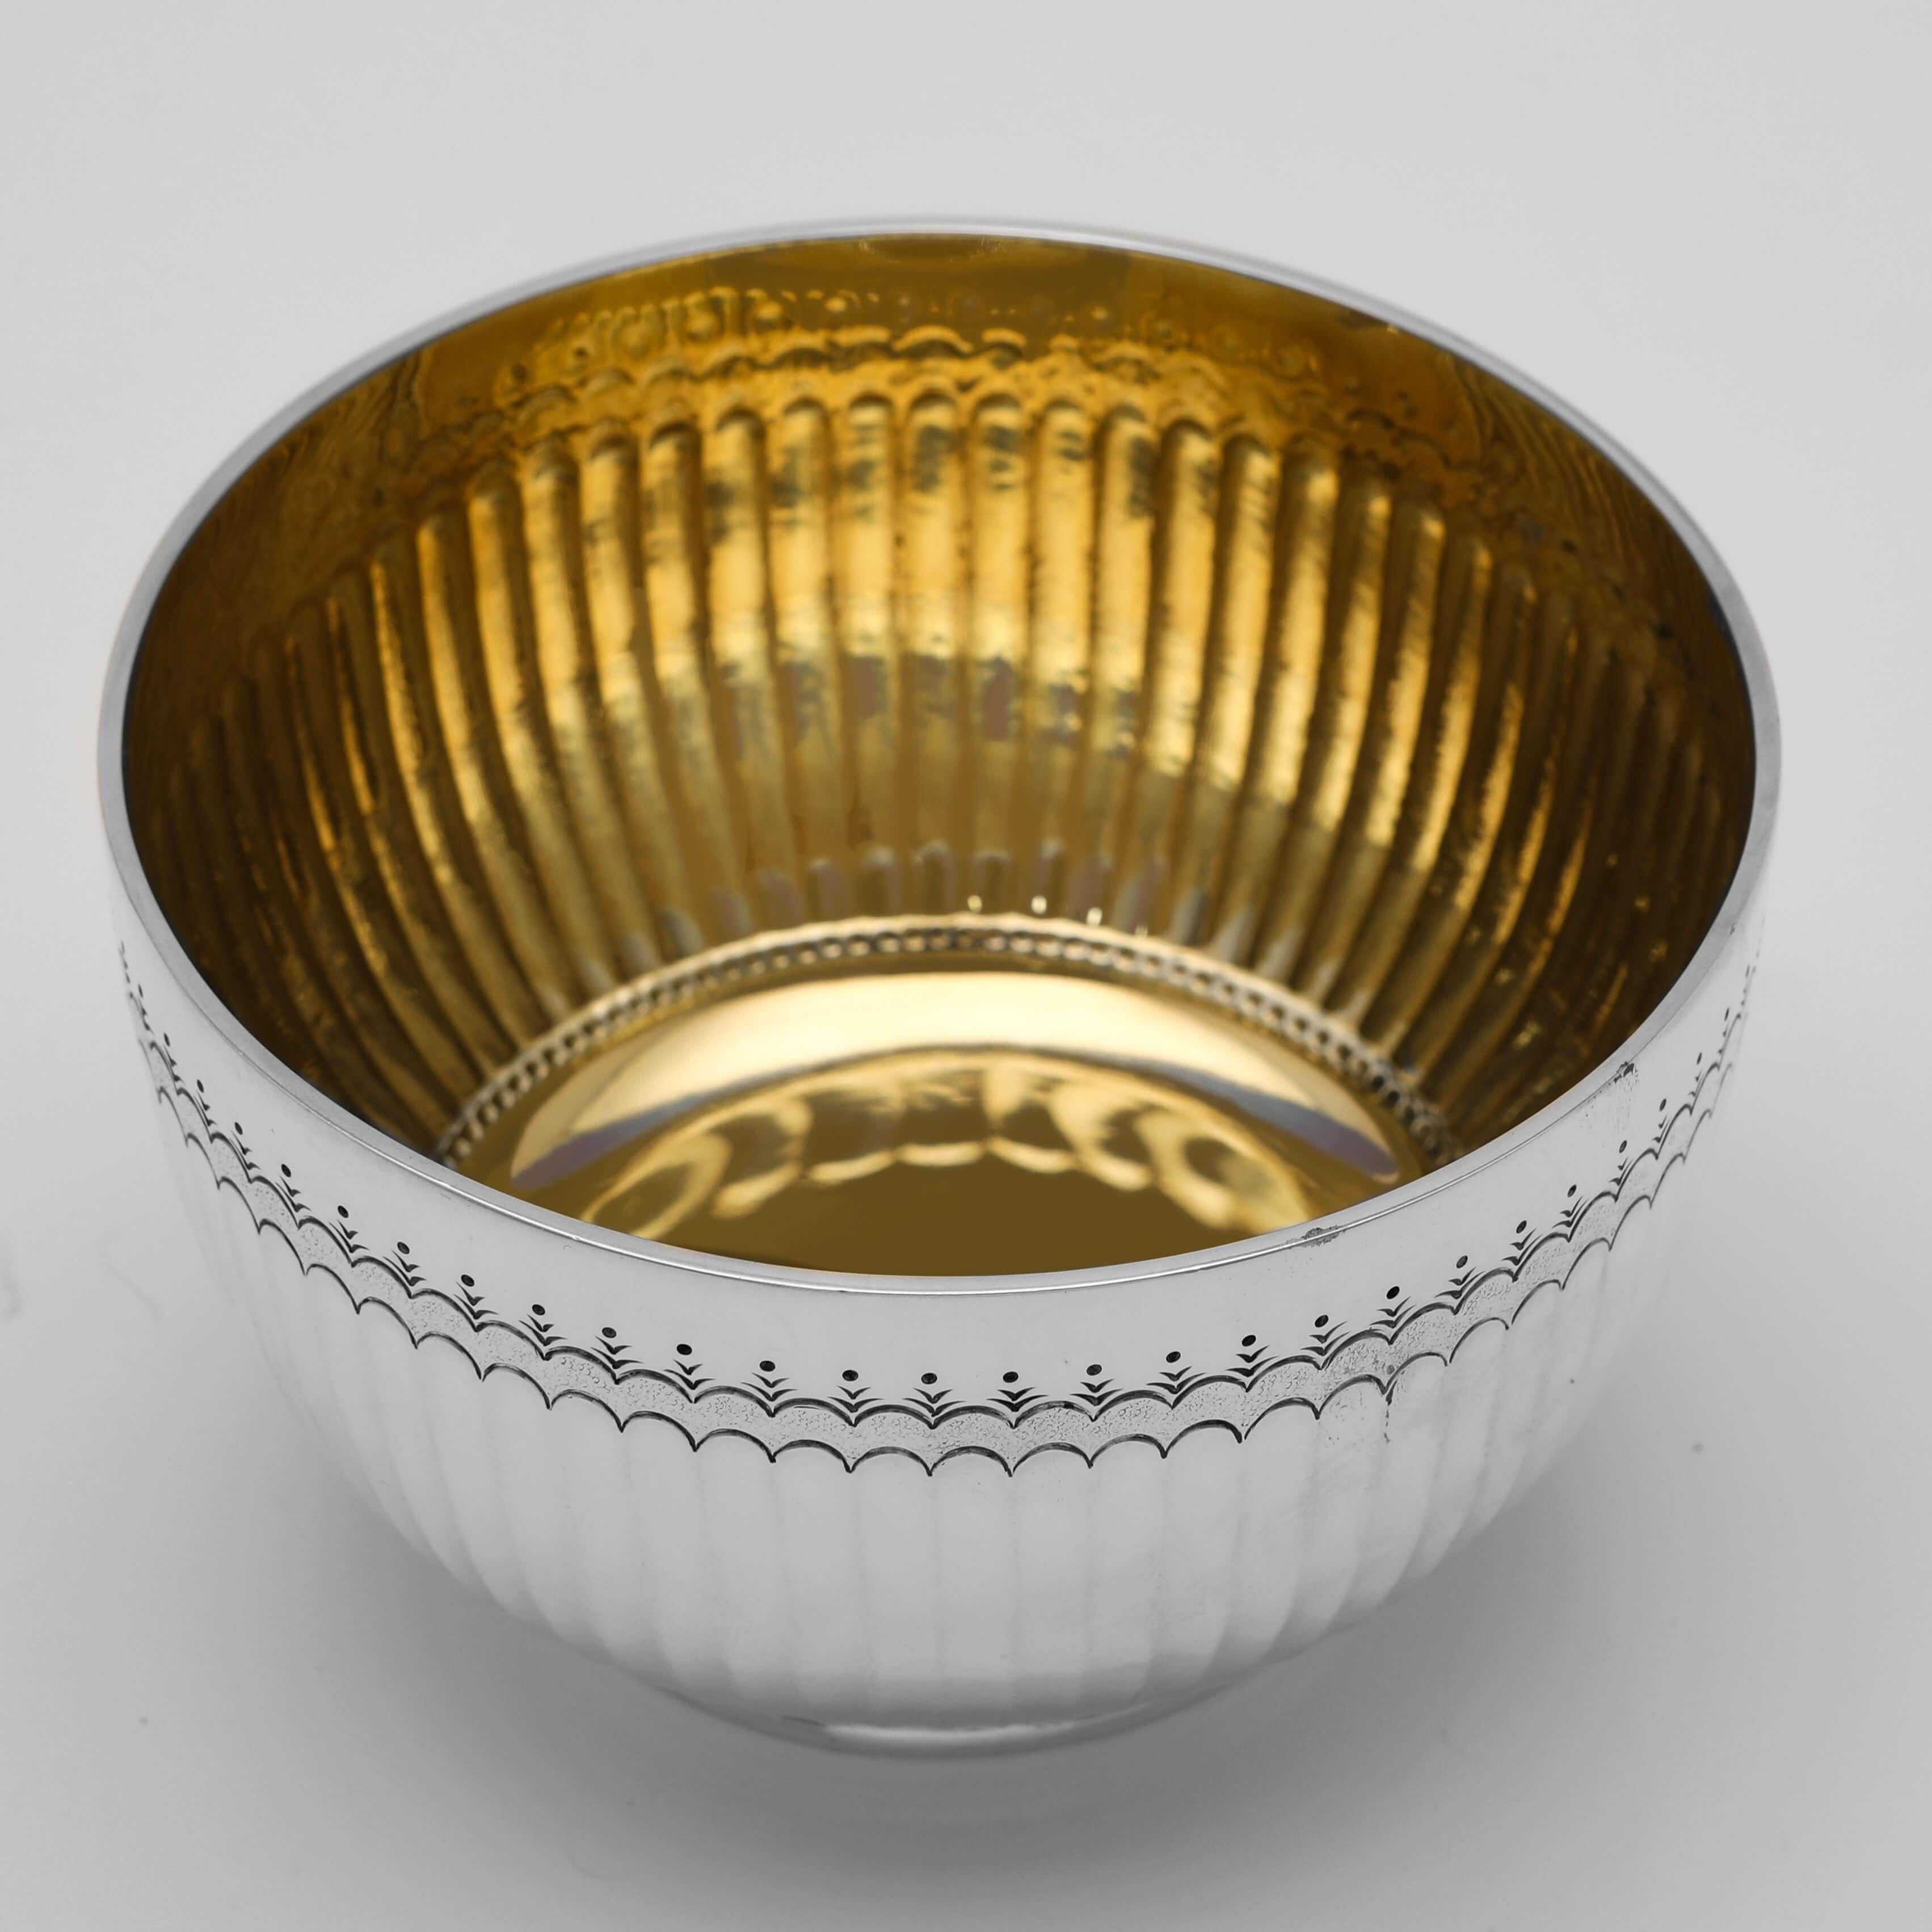 Hallmarked in London in 1902 by F. B. Thomas & Co., this attractive, Edwardian, Antique Sterling Silver Bowl, features sunken fluting, a band of engraved decoration near the rim, and a gilt interior. 

The bowl measures 2.75